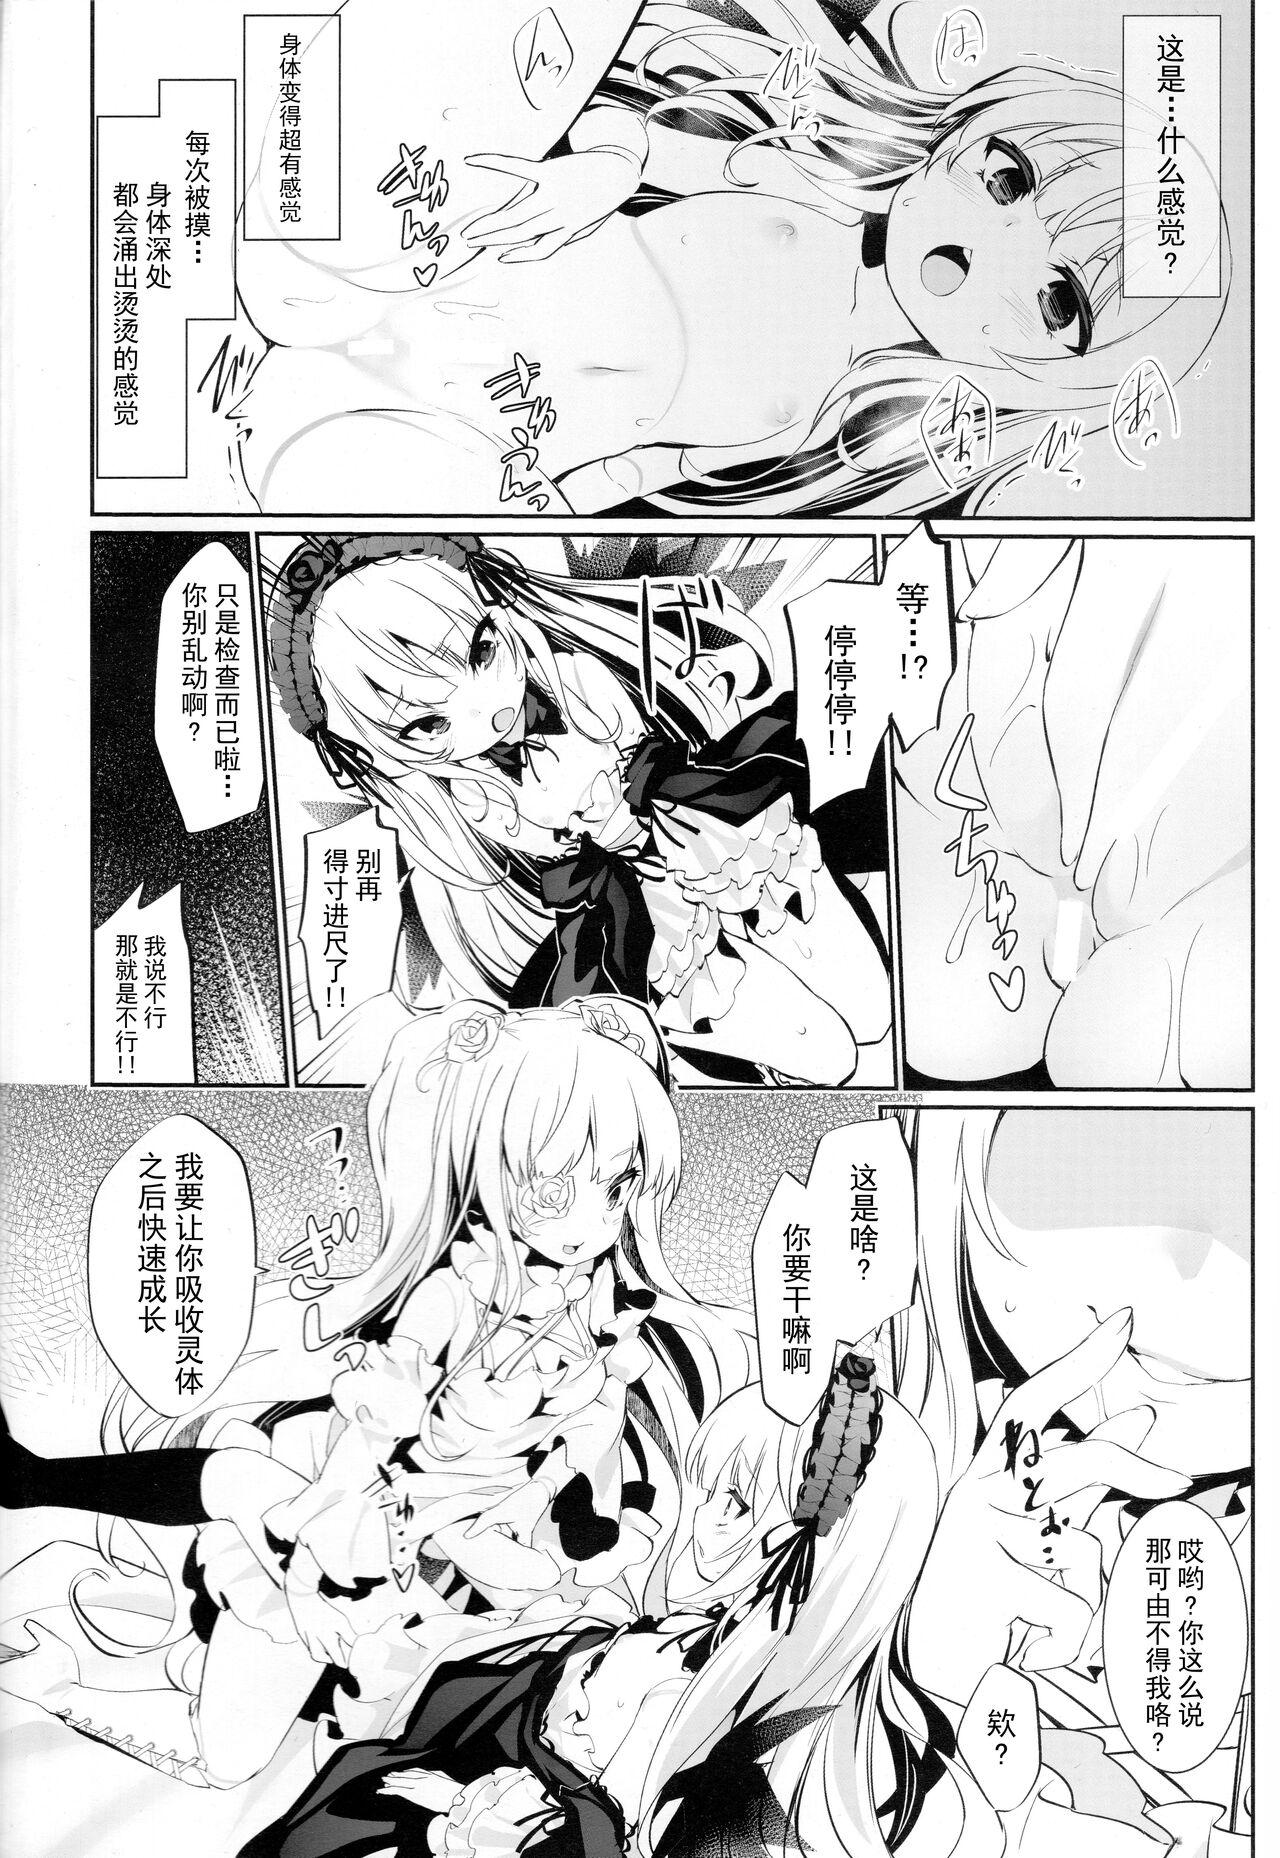 Gayemo Glamour Growth - Rozen maiden Shaven - Page 5